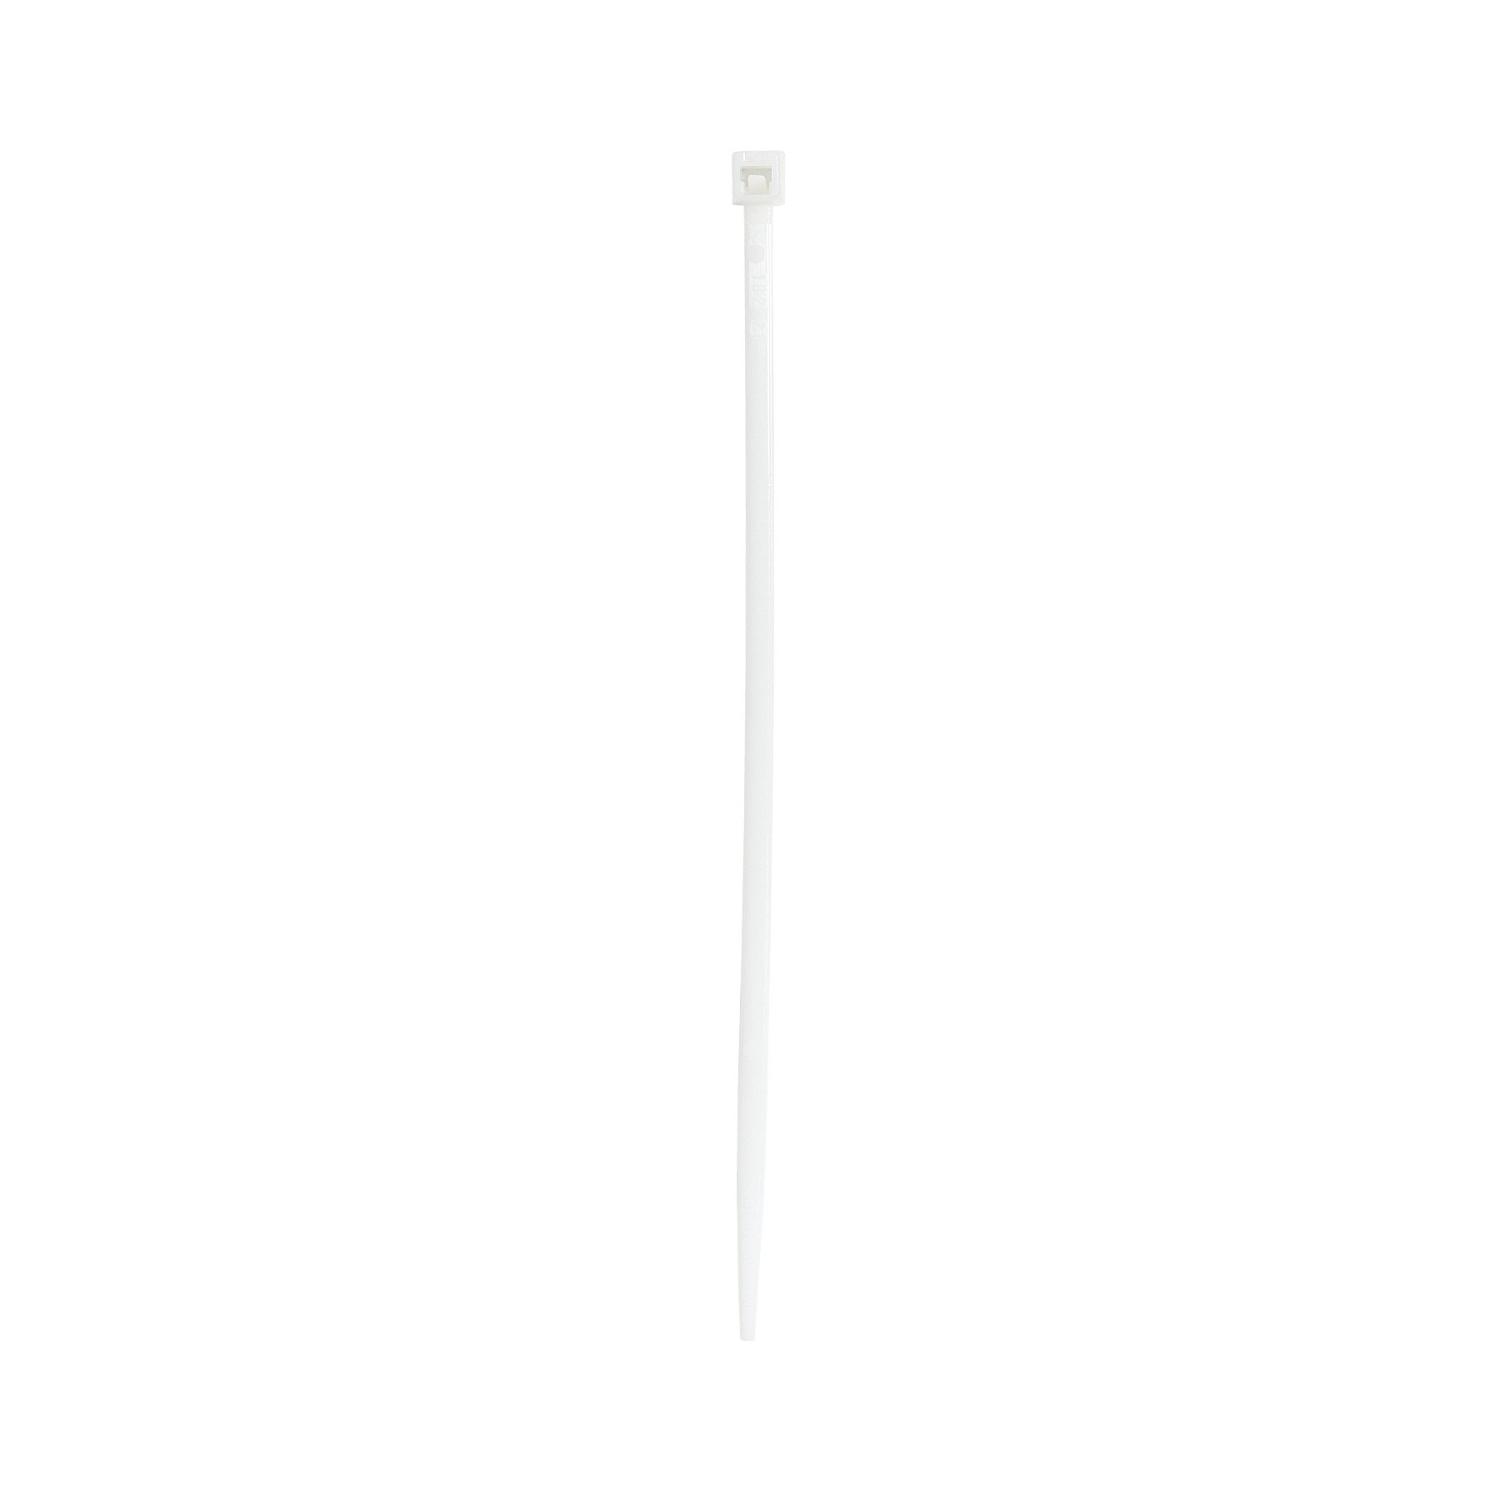 Thomas & Betts TY300-40-100 Catamount Standard Cable Tie